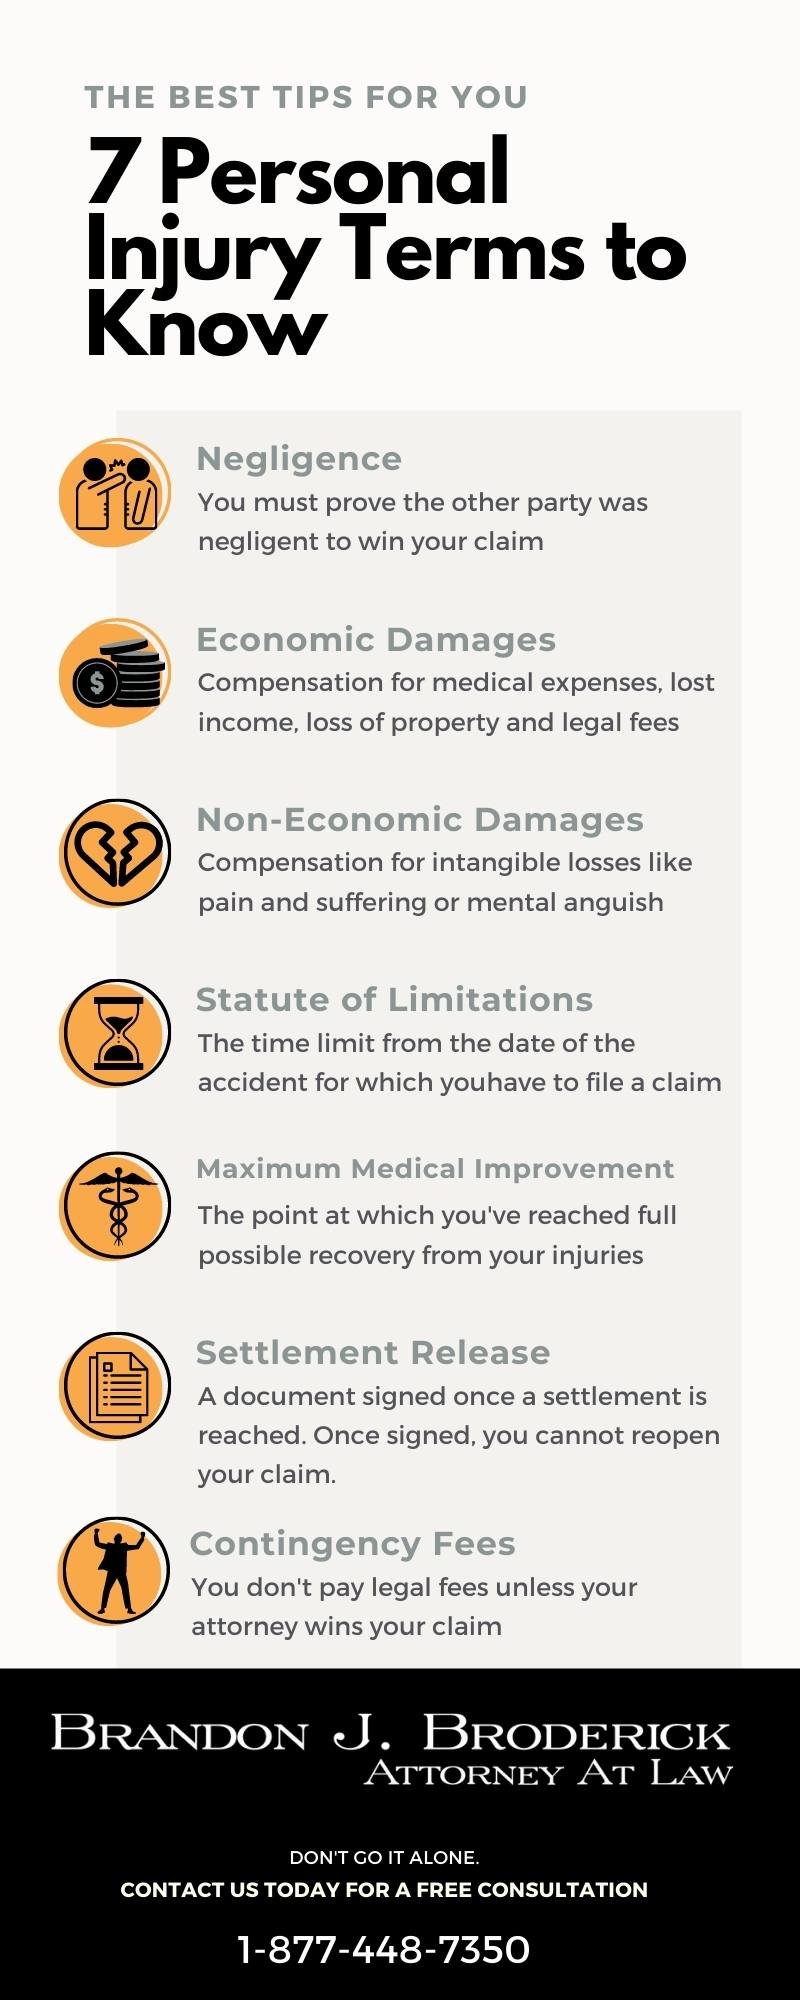 Personal injury terms to know: 1. Negligence 2. Settlement Release 3. Economic Damages 4. Non-economic damages 5. Statute of limitations 6. Maximum medical improvement 7. Contingency fees